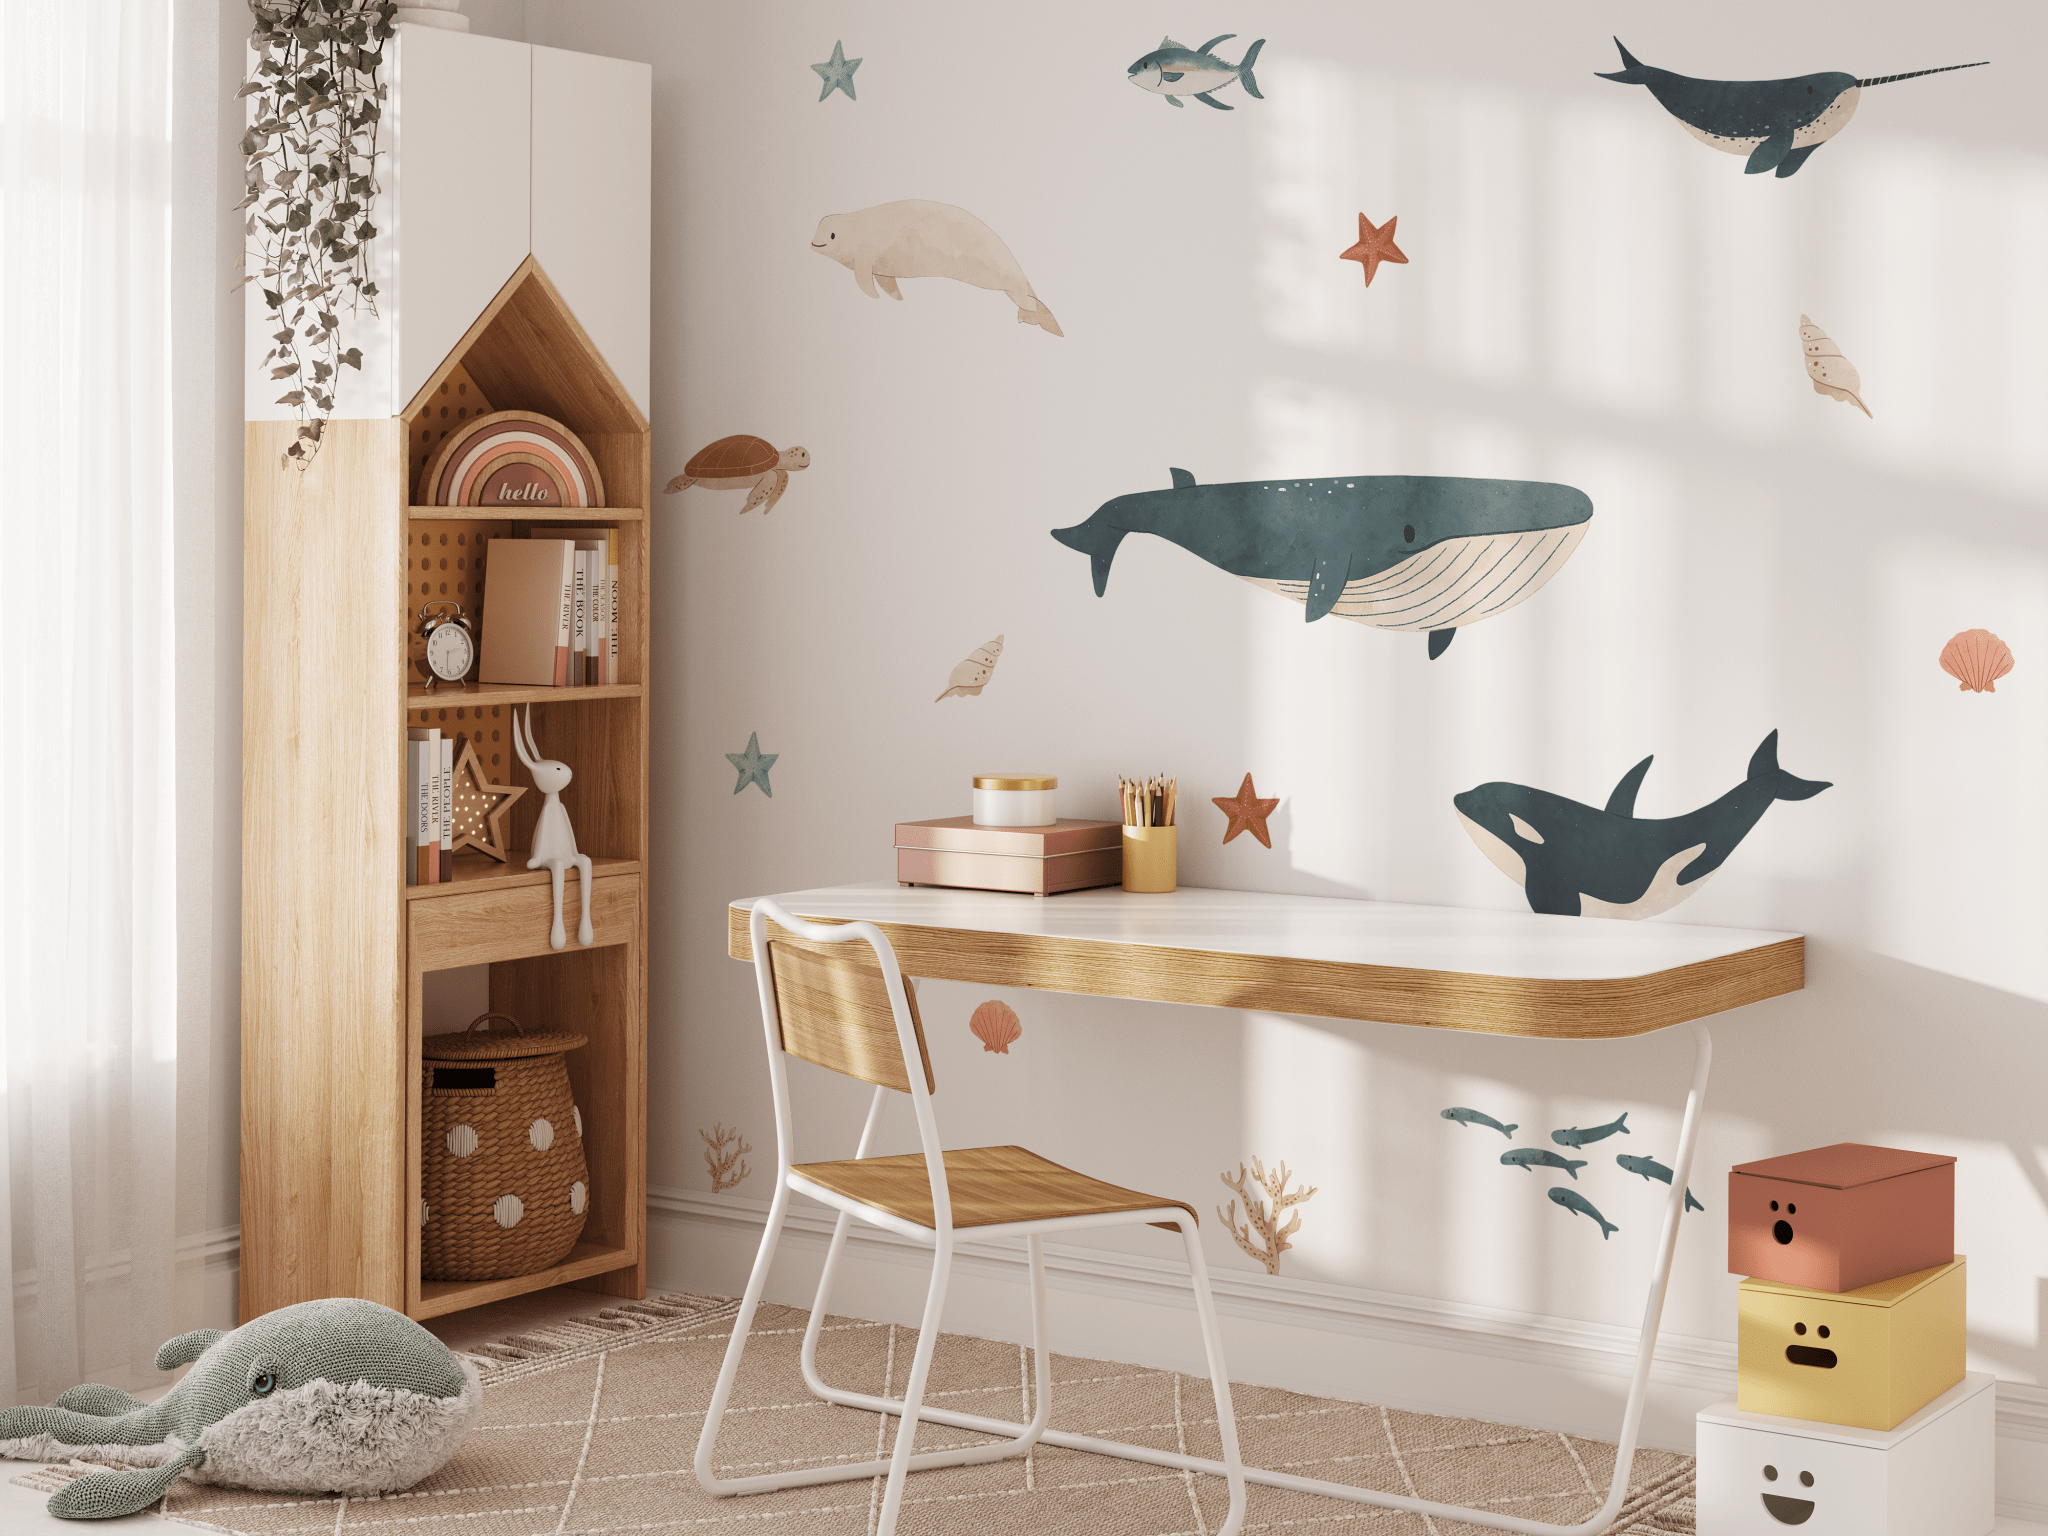 Study corner in a kid's room decorated with charming sea creature decals, accompanied by a stuffed dolphin and warm wooden furniture.